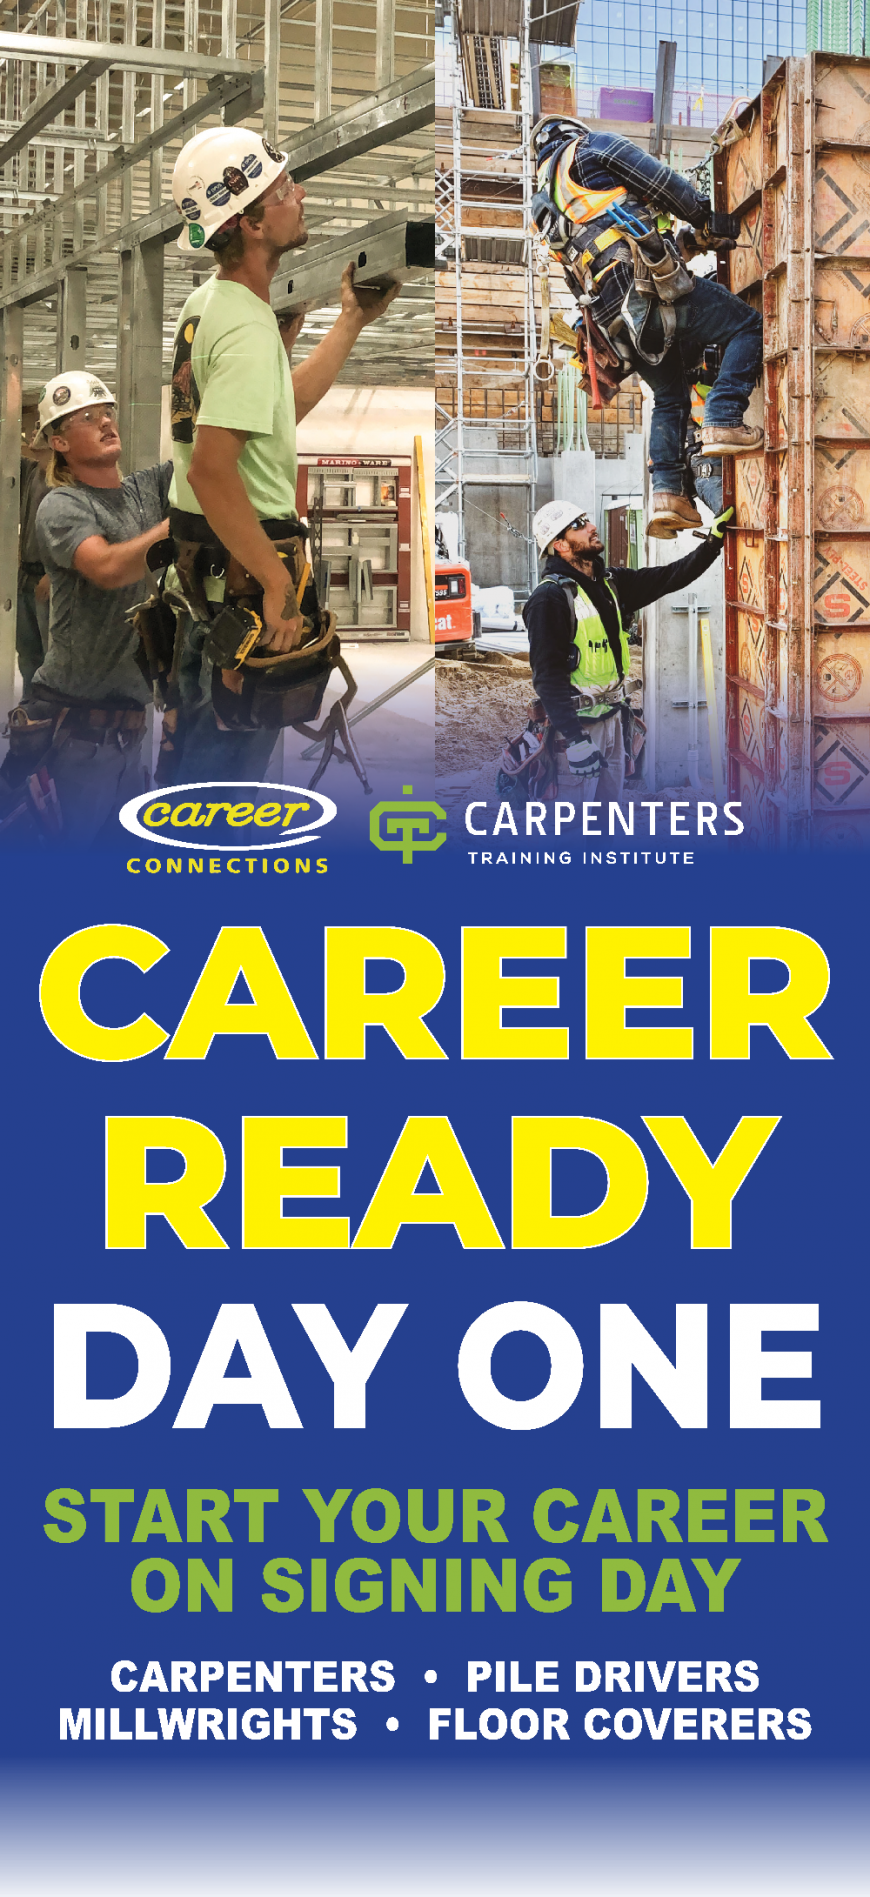 Career Ready Day One_Career Connections